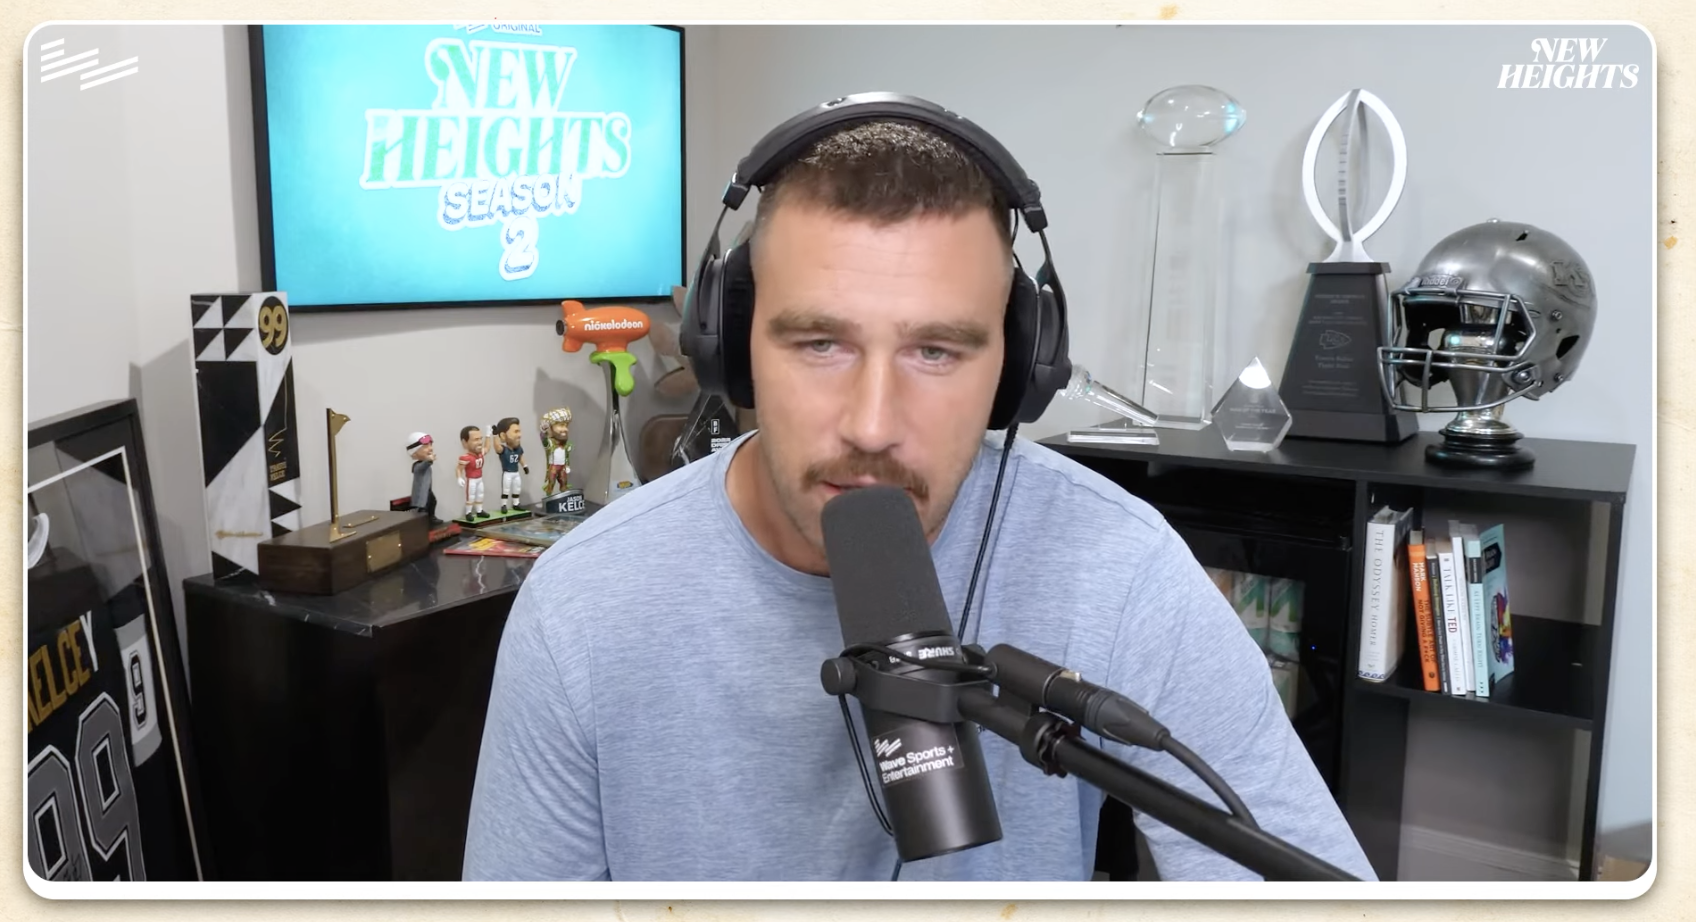 Travis sitting at a microphone and wearing headphones on the podcast